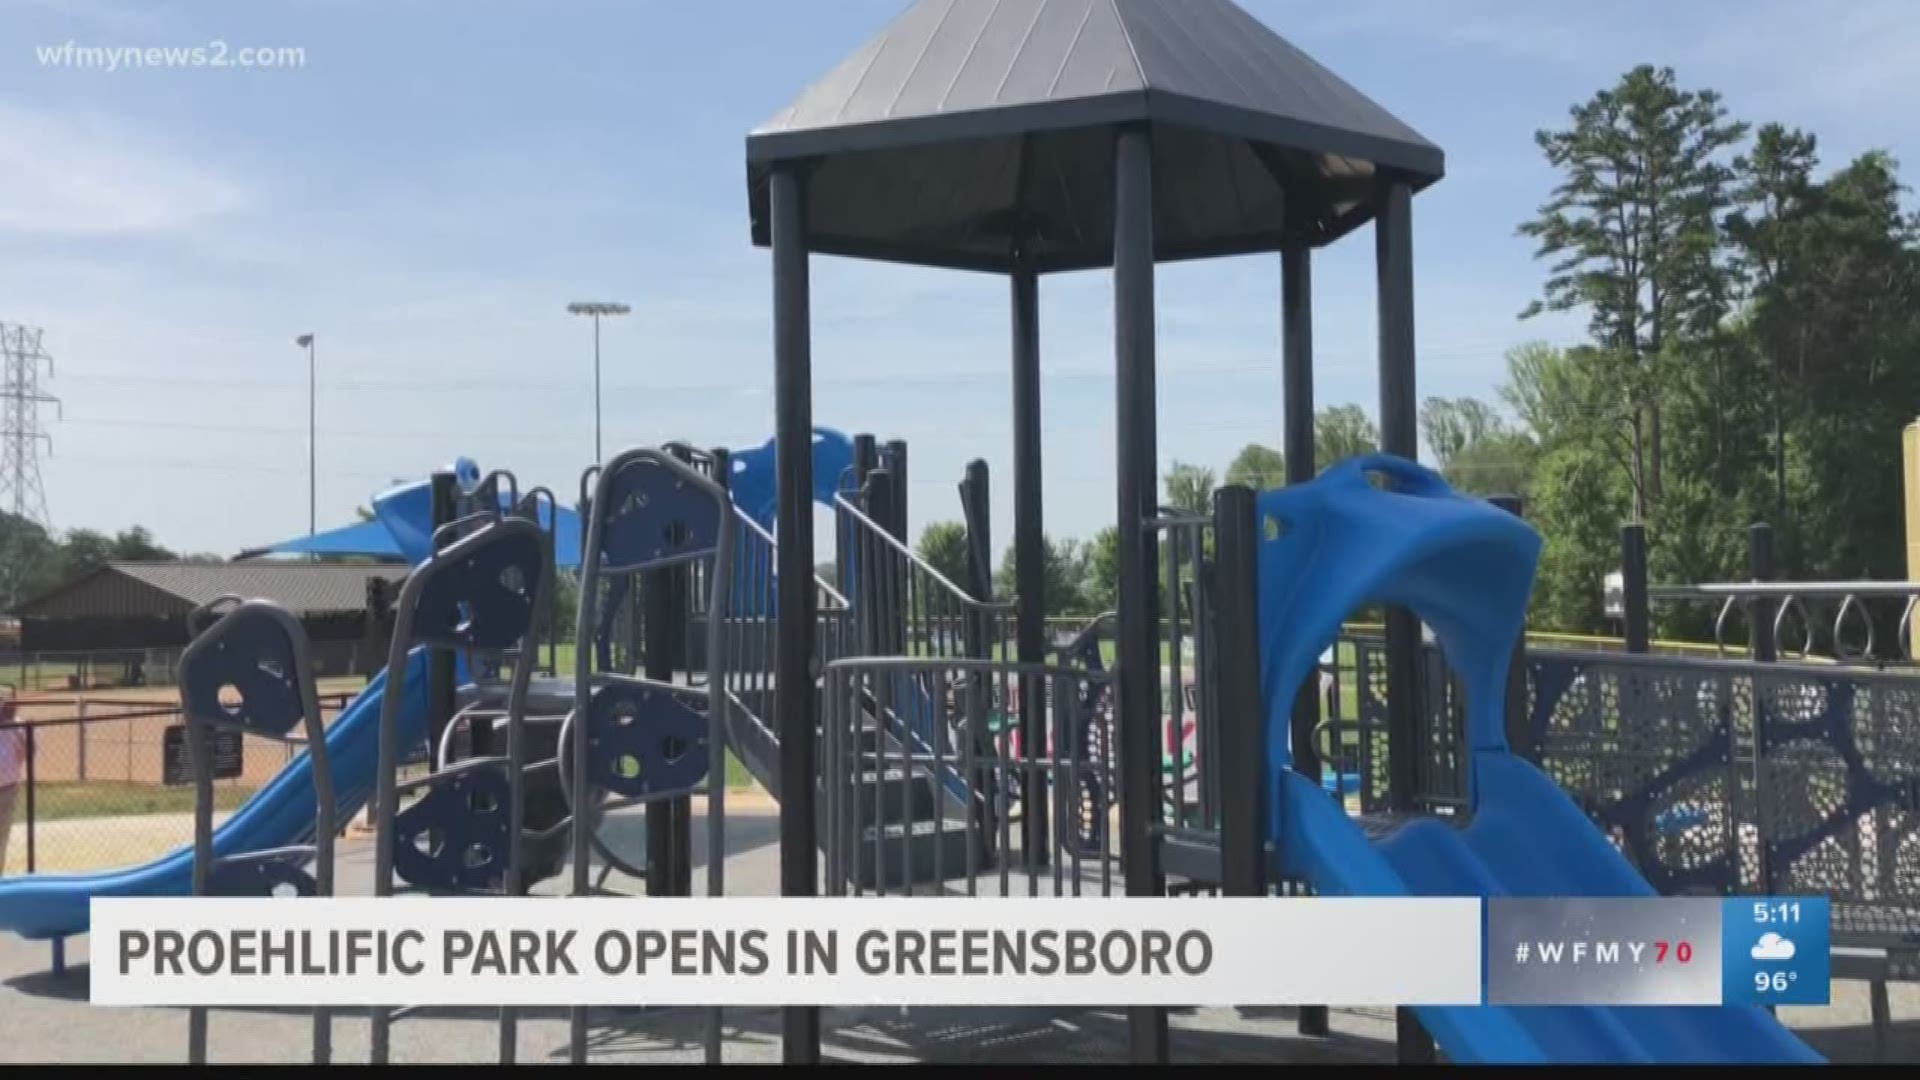 The new playground addresses the vital need for recreational spaces where children with special needs feel welcome and can engage in play without barriers